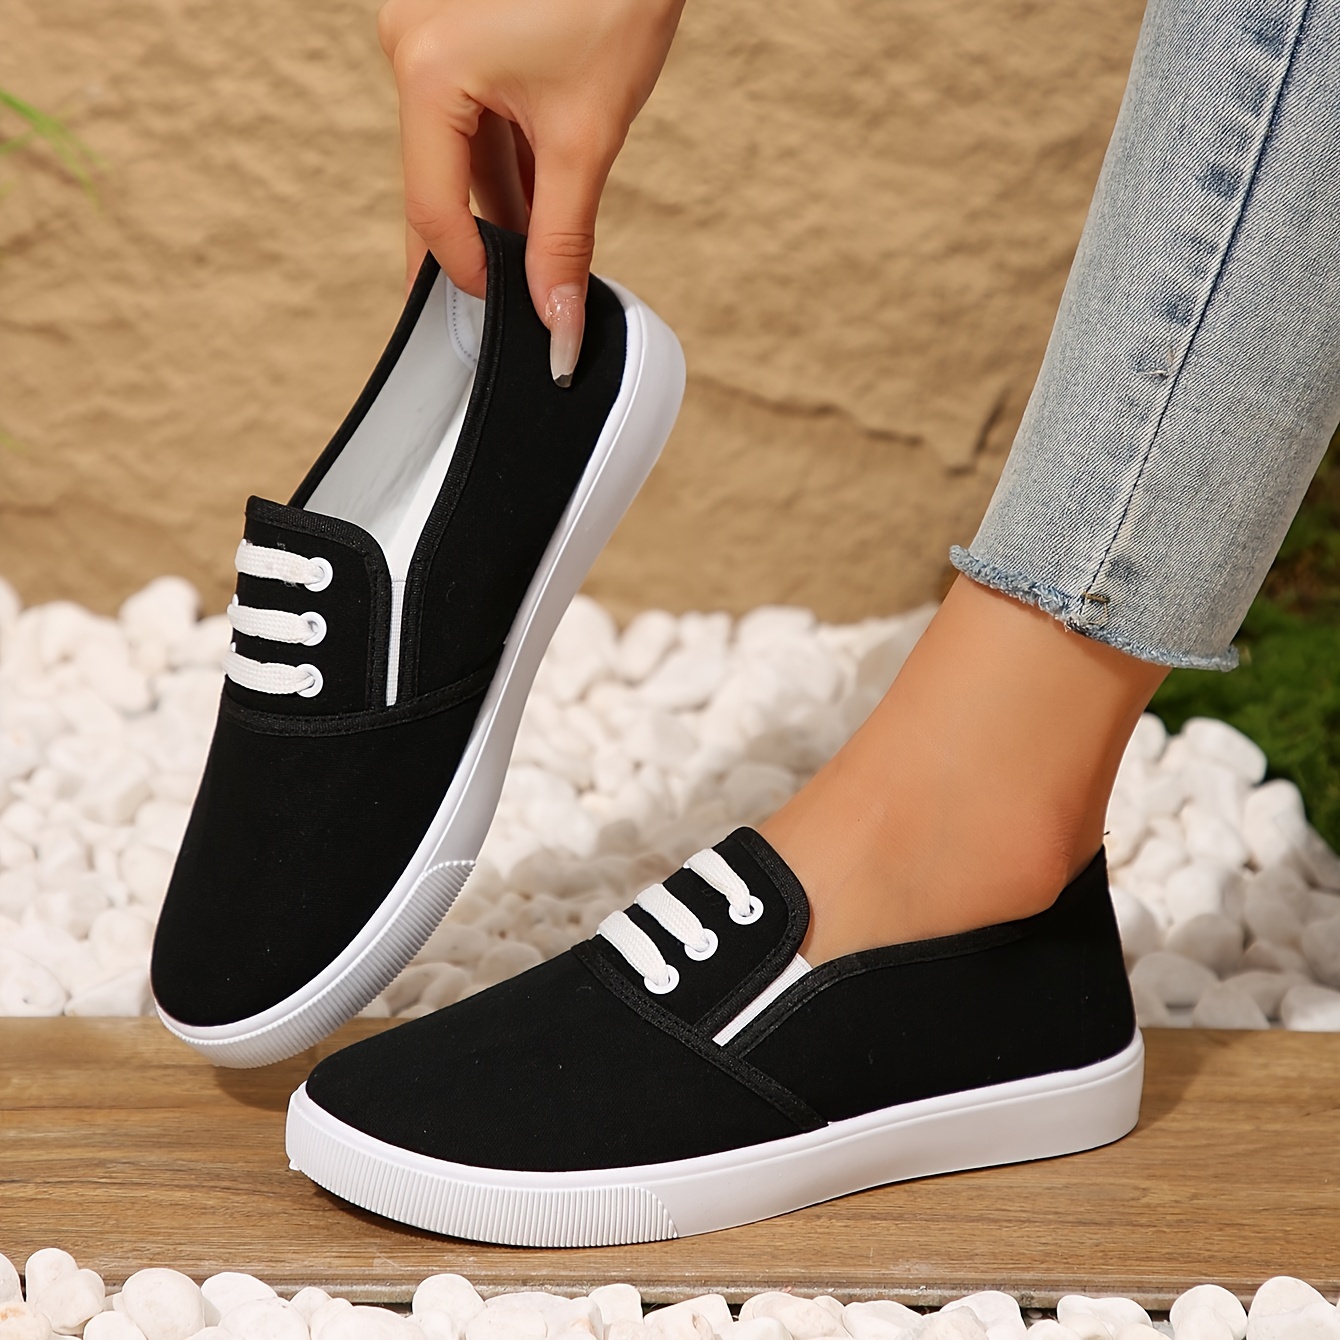 

Women's Solid Color Minimalist Sneakers, Slip On Lightweight Flat Soft Sole Canvas Shoes, Low-top Comfort Daily White Shoes